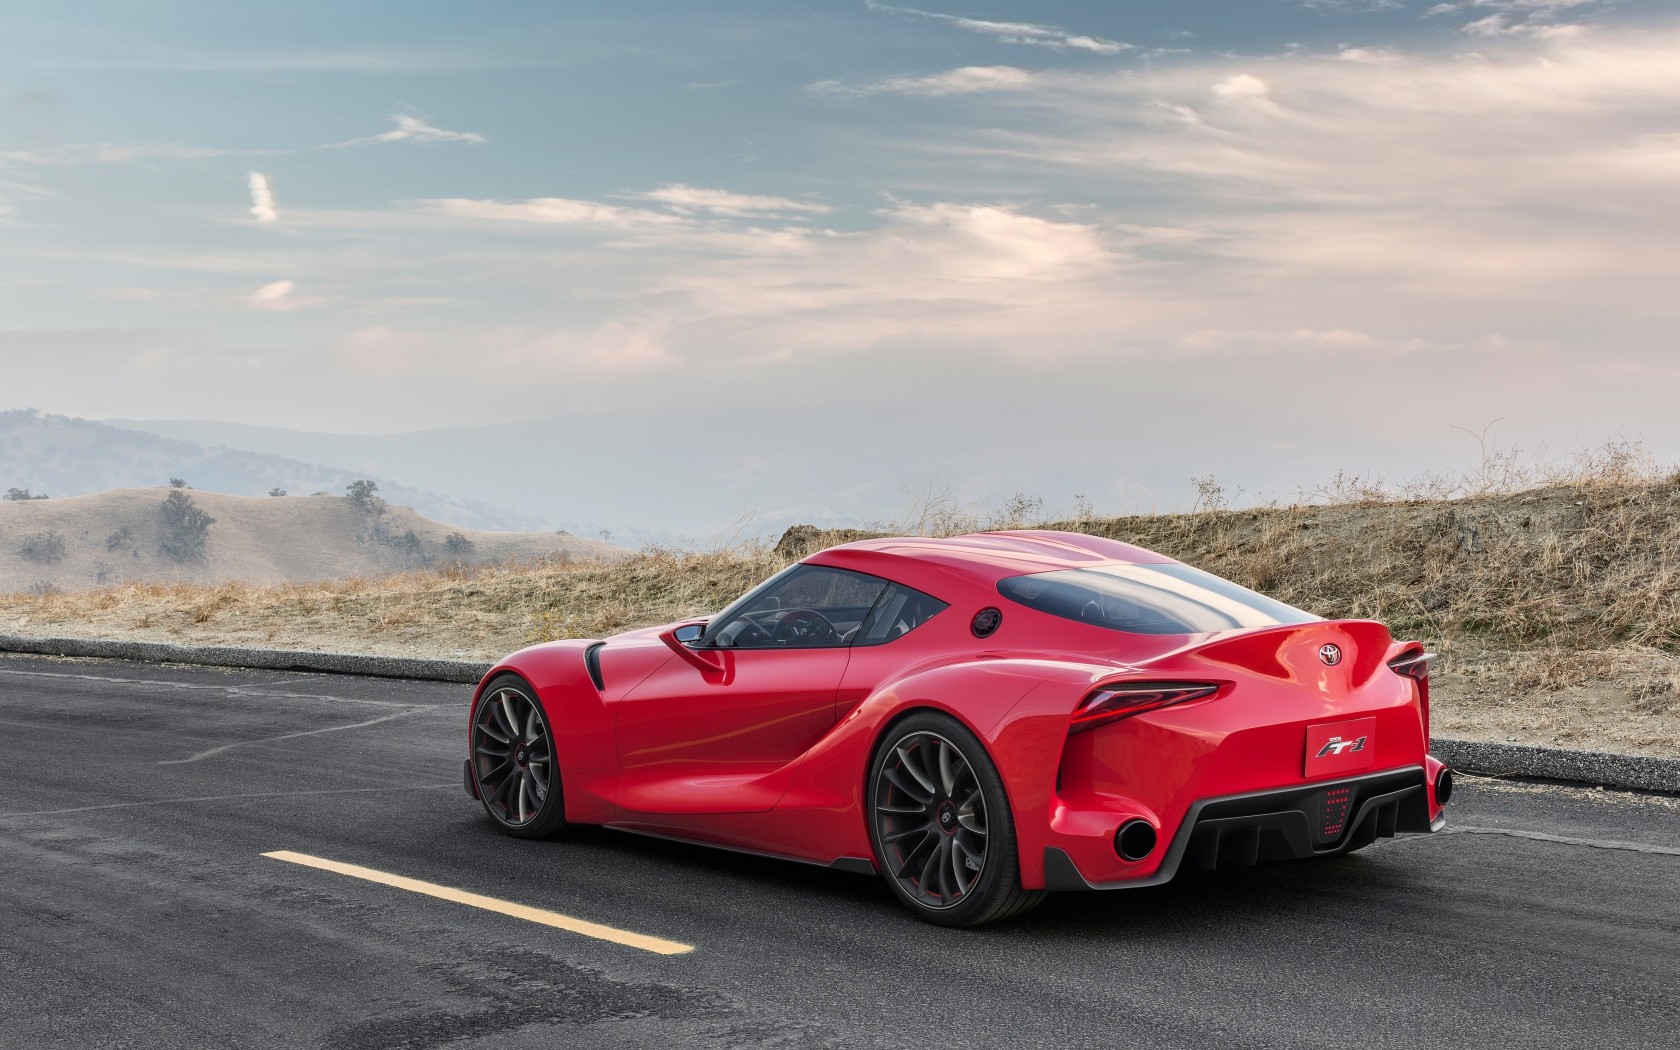 General 1680x1050 Toyota Toyota FT-1 red cars supercars concept cars vehicle road outdoors asphalt Japanese cars